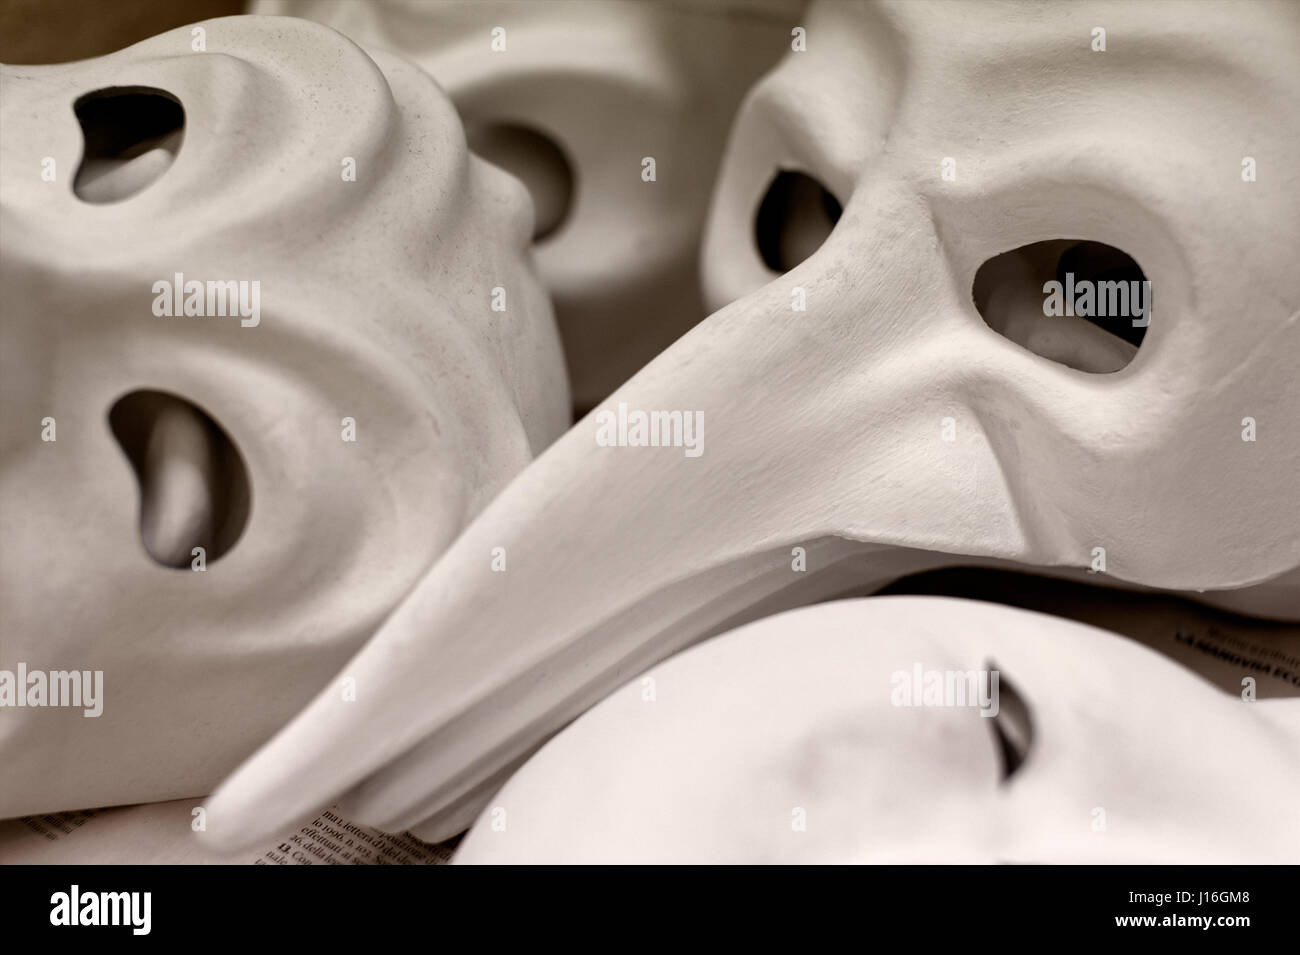 Backgrounds and textures: big group of unfinished traditional Venice masks, plain white paper Stock Photo